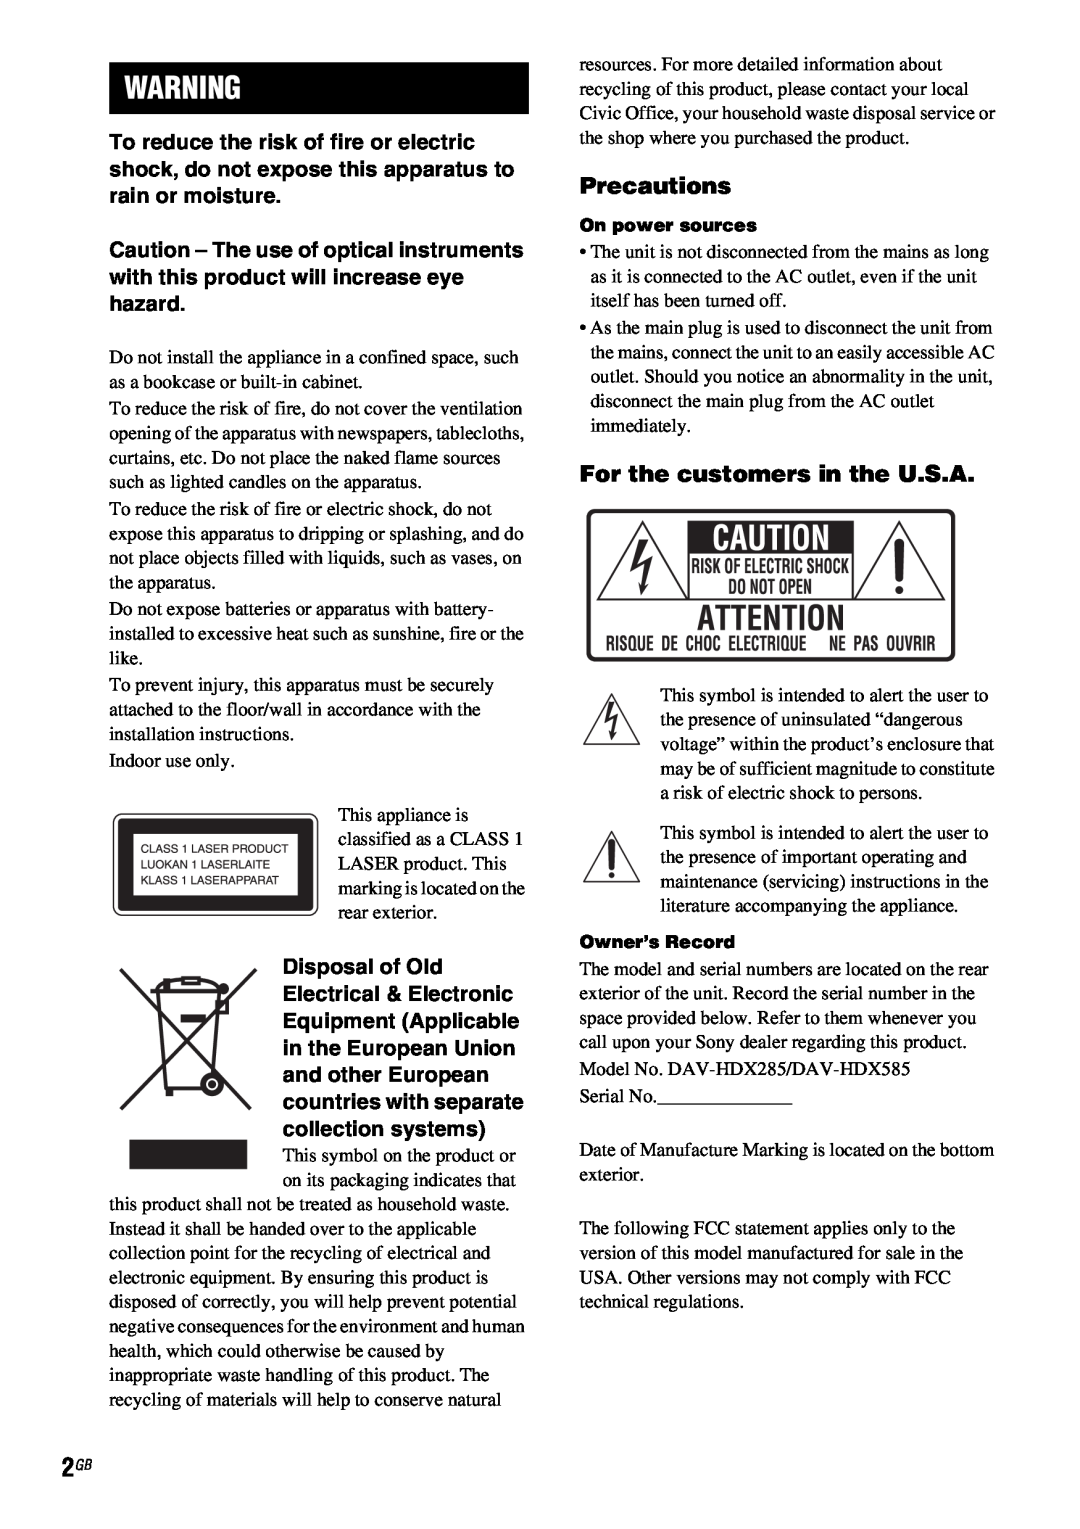 Sony DAV-HDX685 manual Precautions, For the customers in the U.S.A 